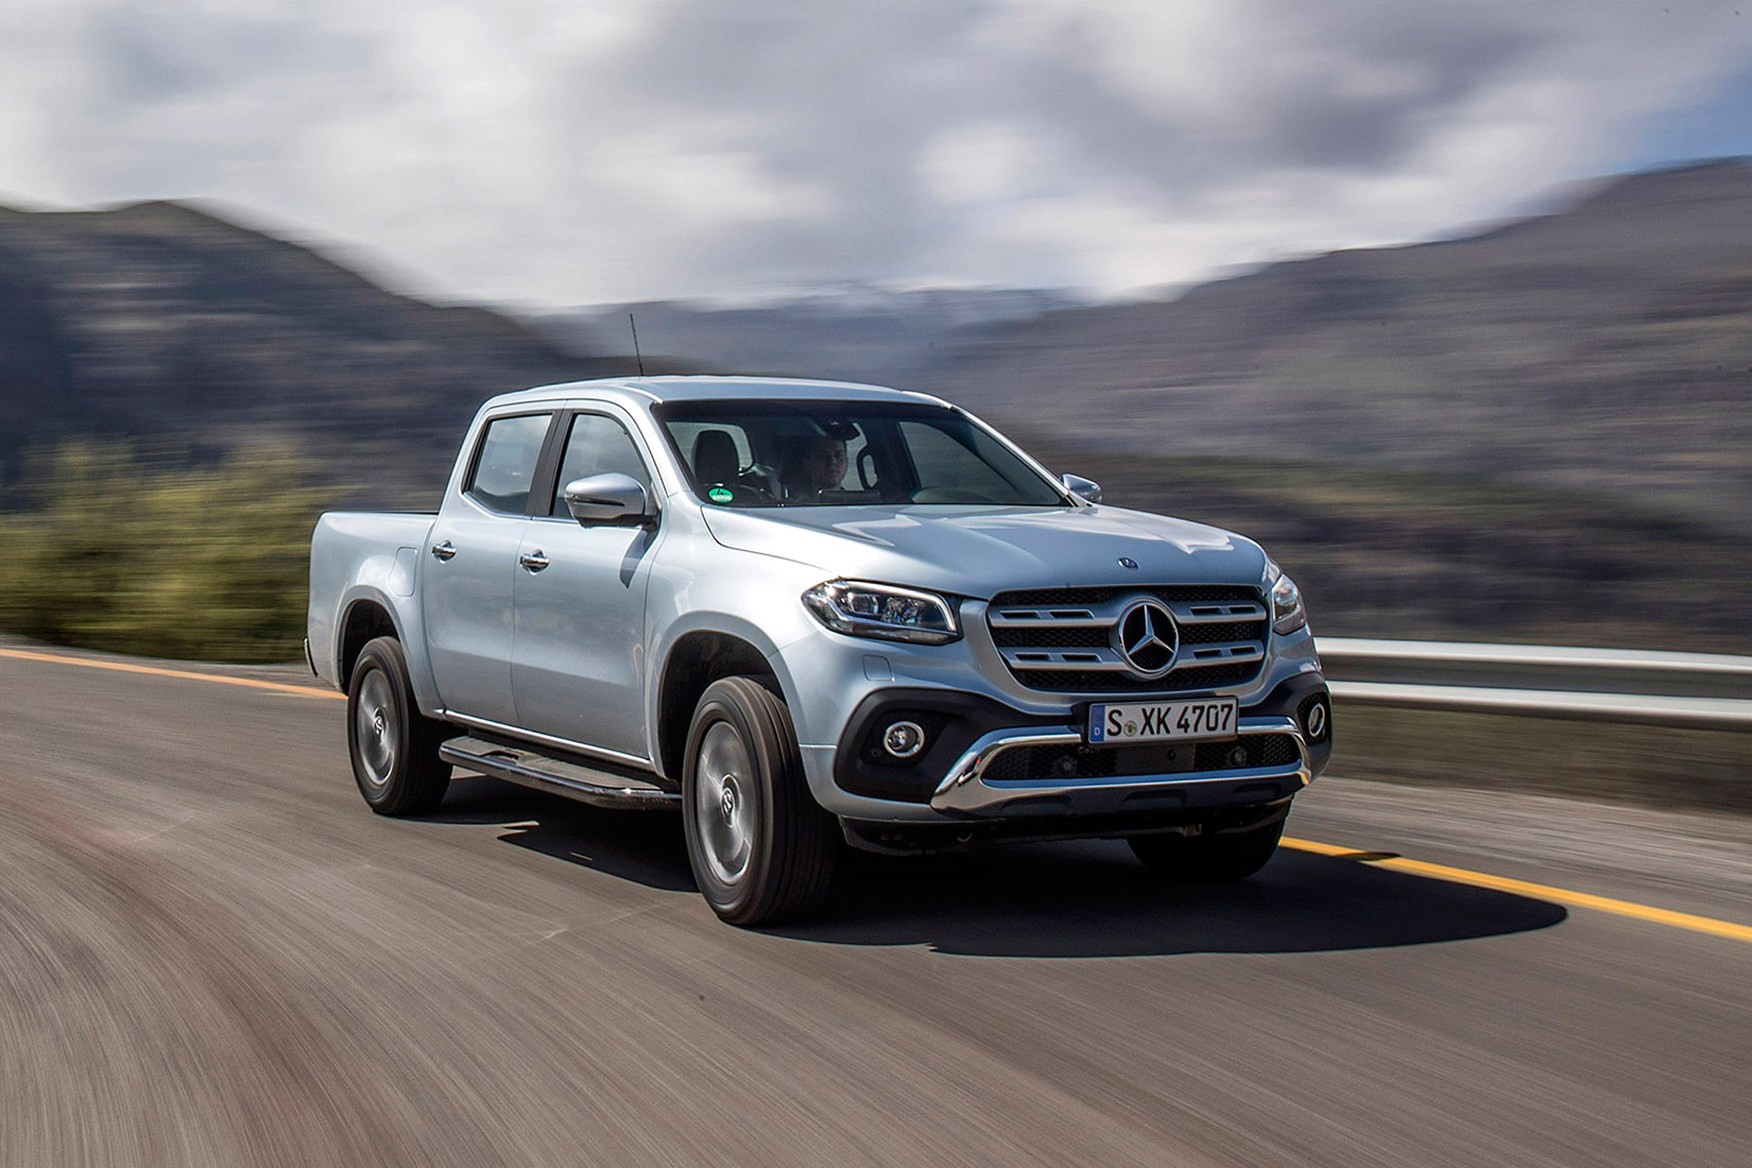 Mercedes-Benz X-Class full review on Parkers Vans - driving experience